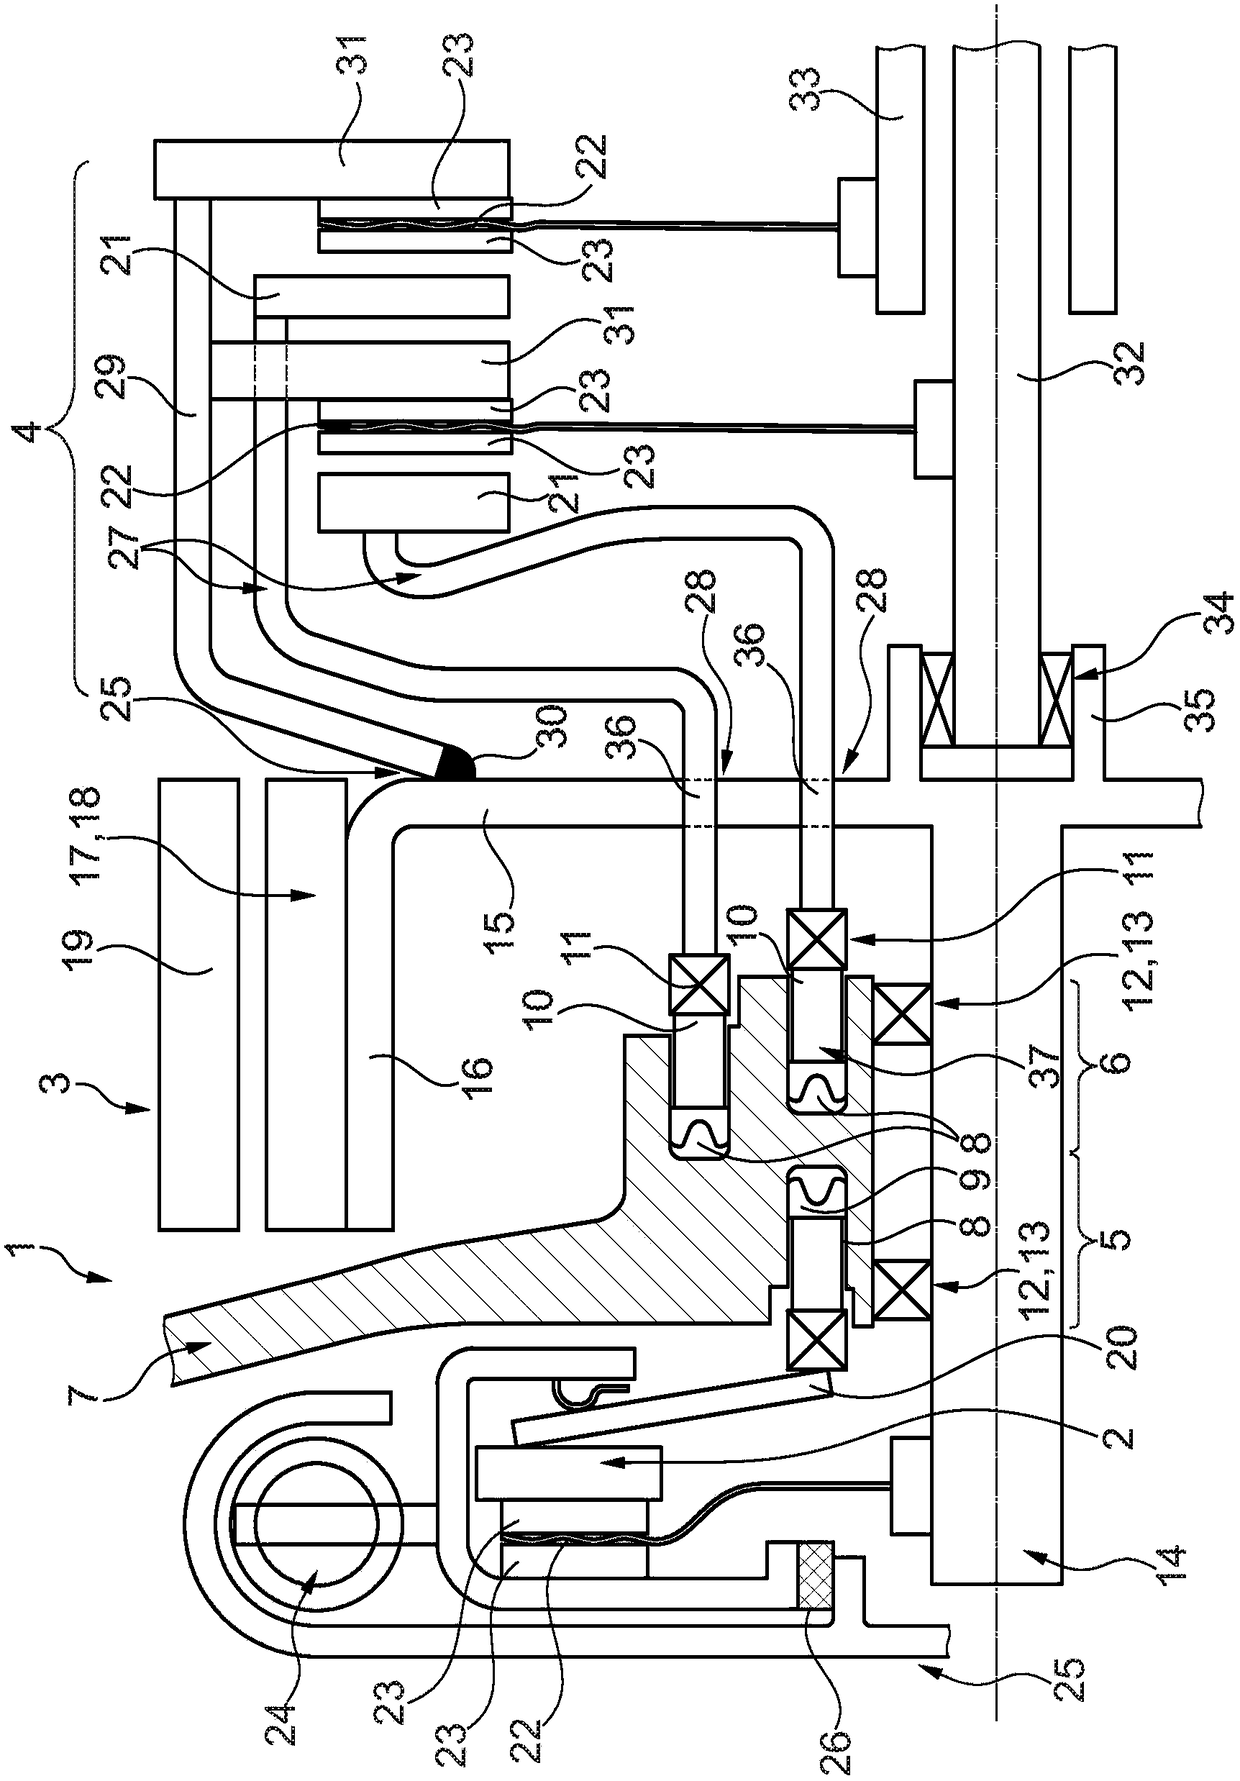 Hybrid module comprising a disconnect clutch and a main clutch and actuating system arranged therebetween